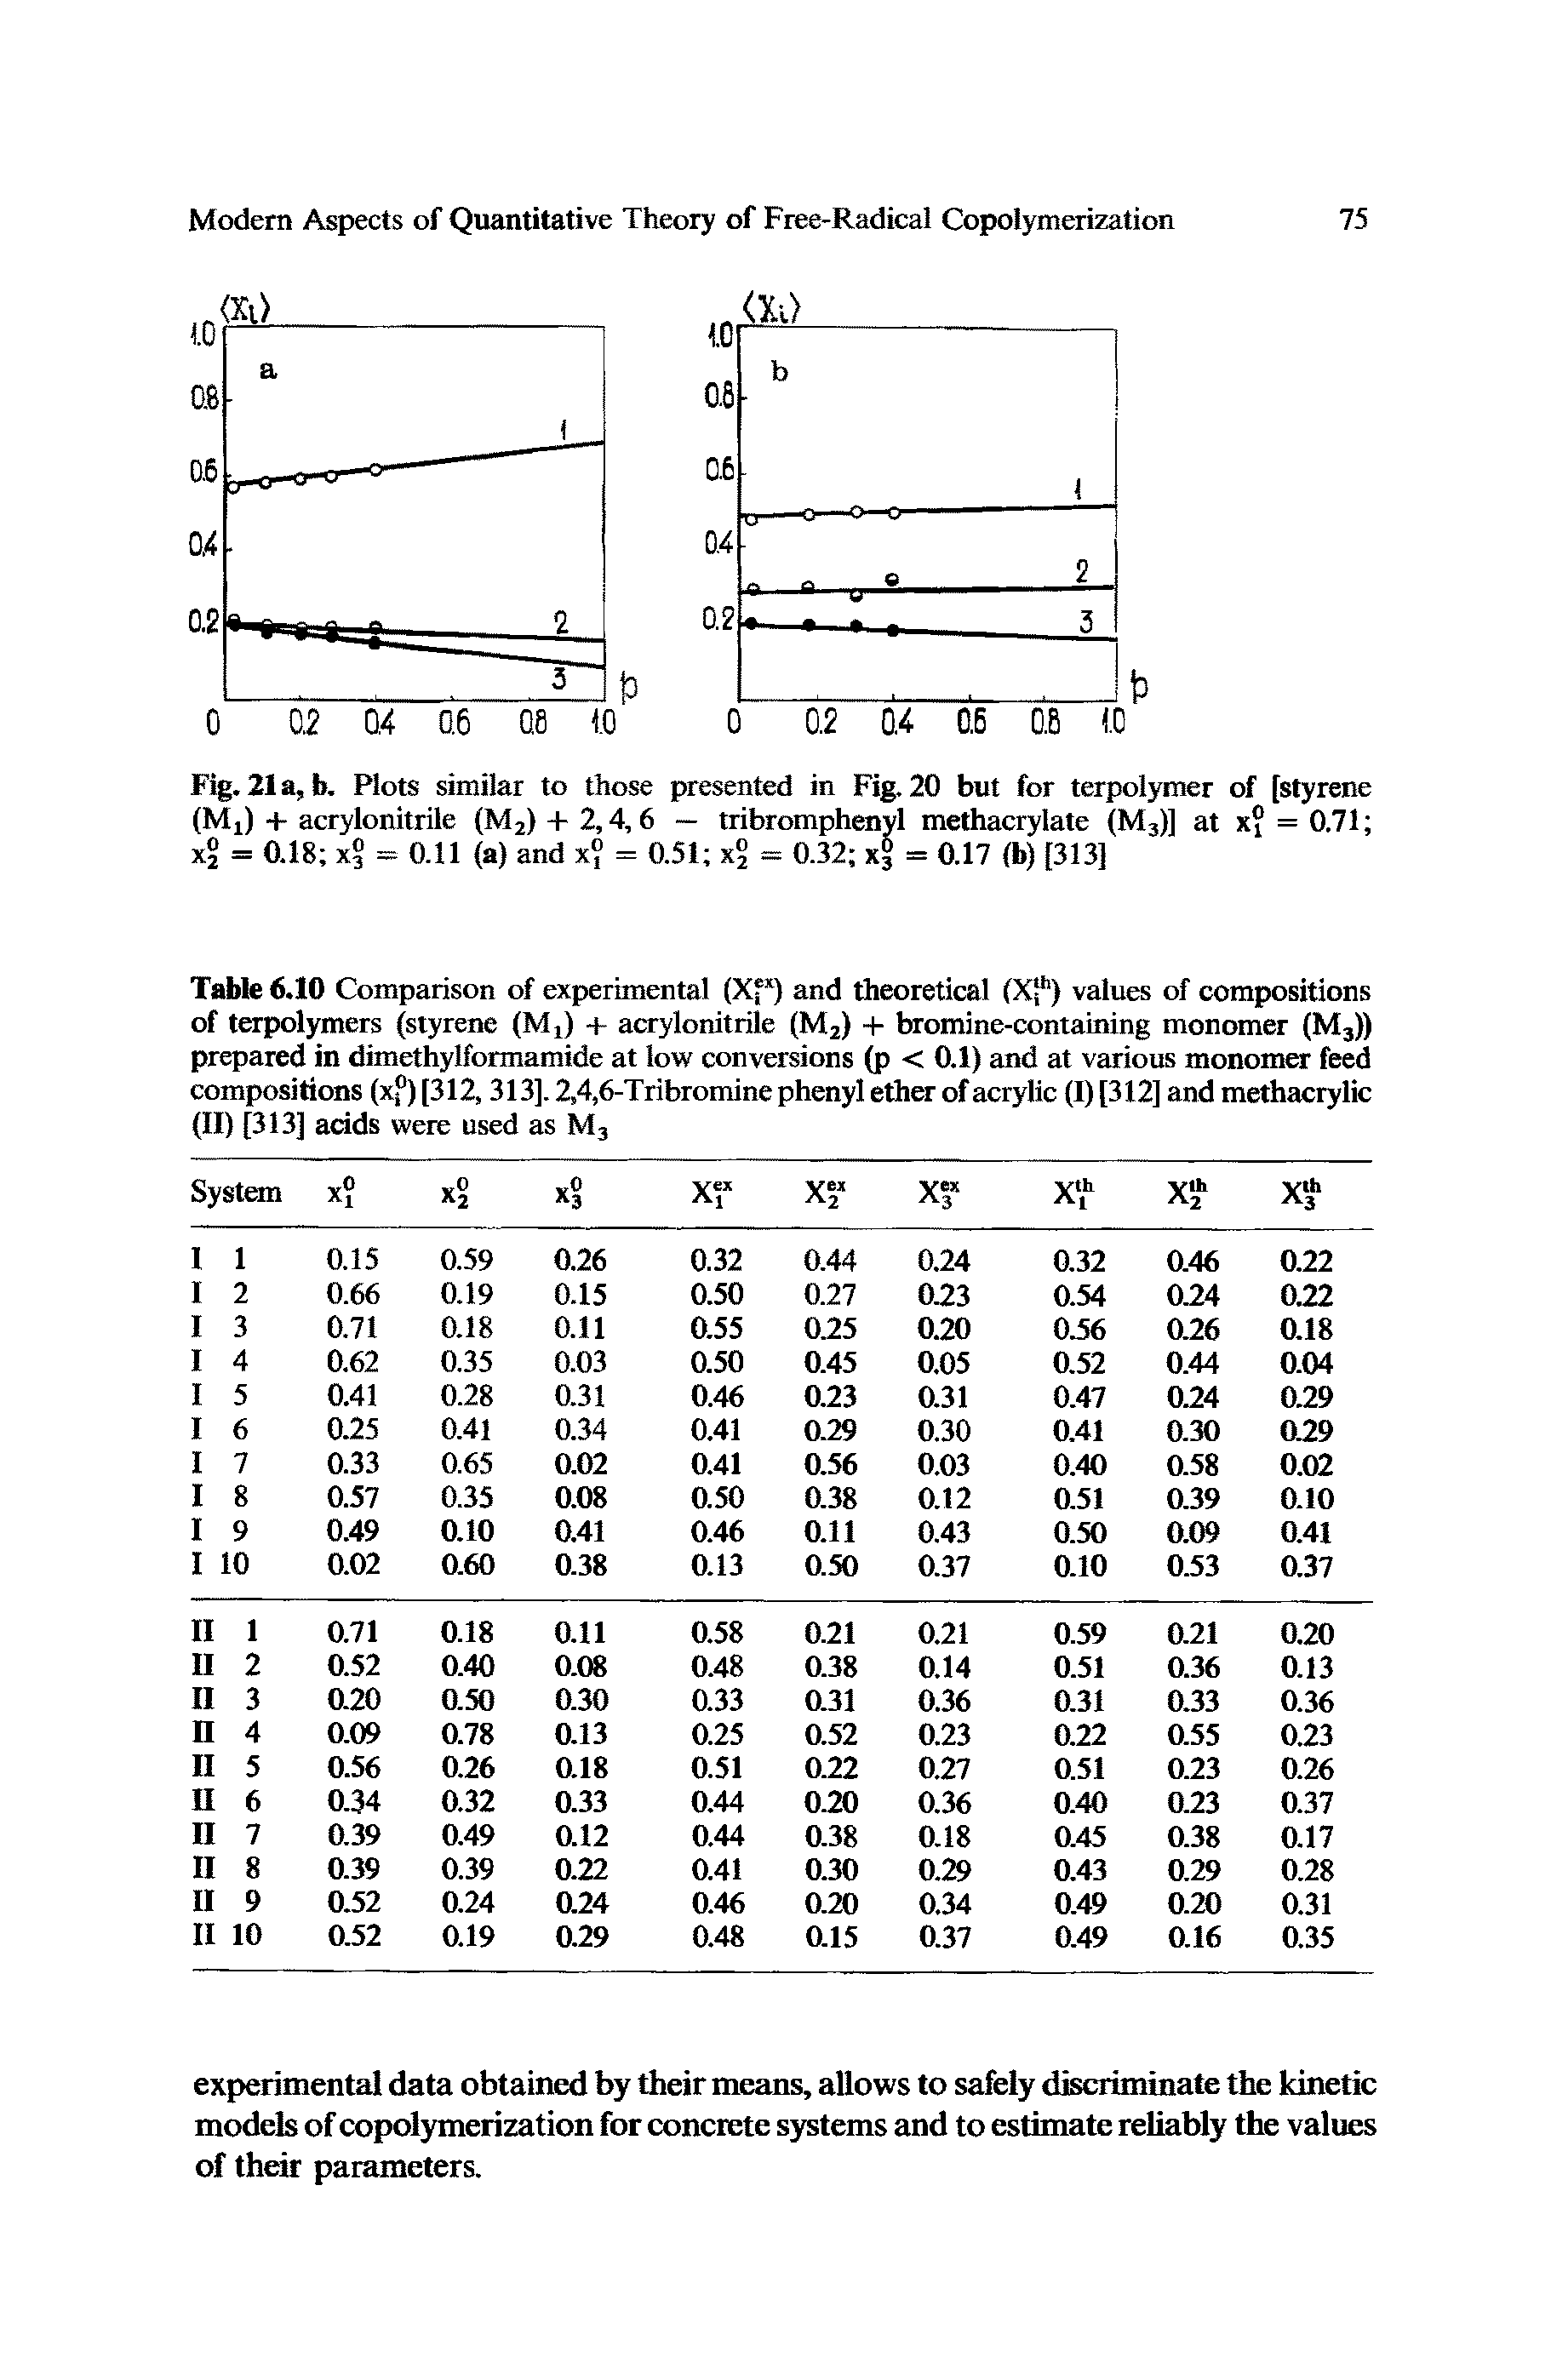 Table 6.10 Comparison of experimental (Xf1) and theoretical (Xf1) values of compositions of terpolymers (styrene (M,) + acrylonitrile (M2) + bromine-containing monomer (M3)) prepared in dimethylformamide at low conversions (p < 0.1) and at various monomer feed compositions (xf) [312, 313]. 2,4,6-Tribromine phenyl ether of acrylic (I) [312] and methacrylic (II) [313] acids were used as M3...